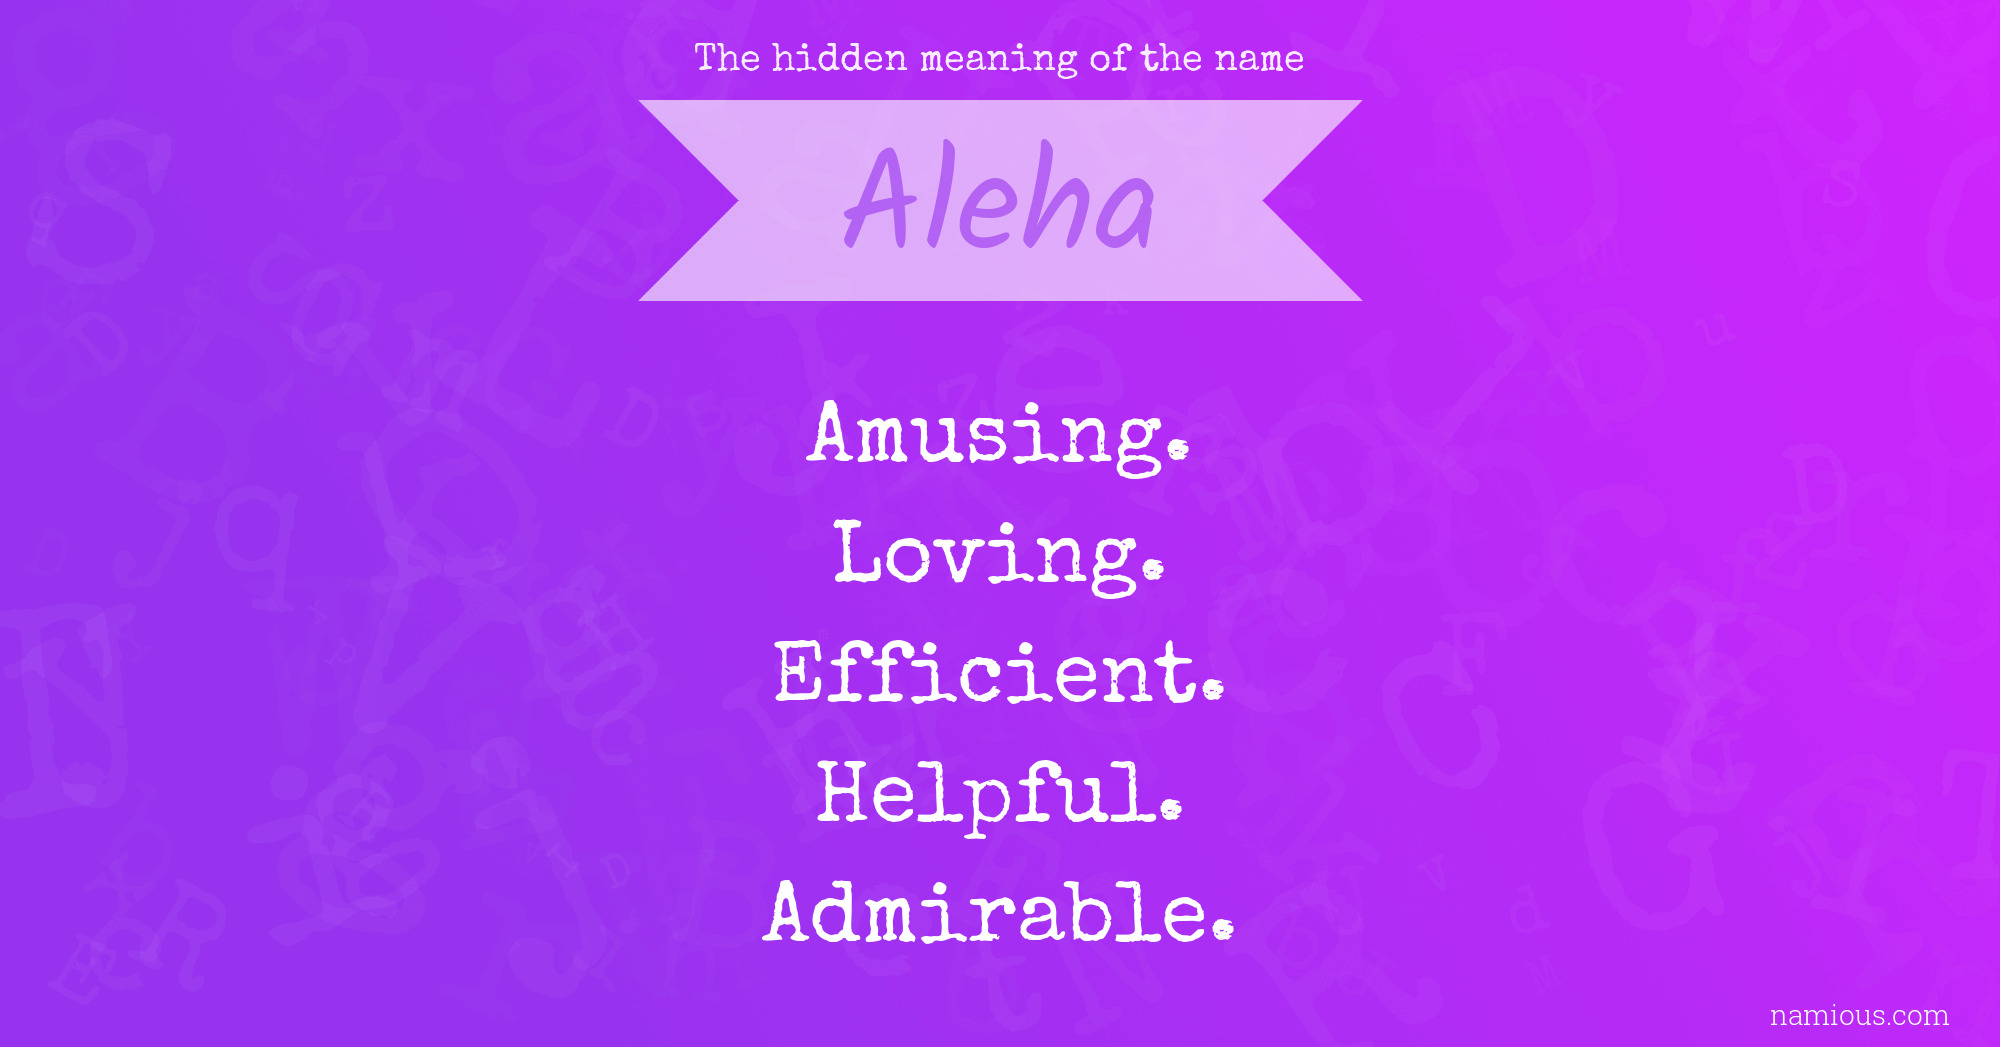 The hidden meaning of the name Aleha